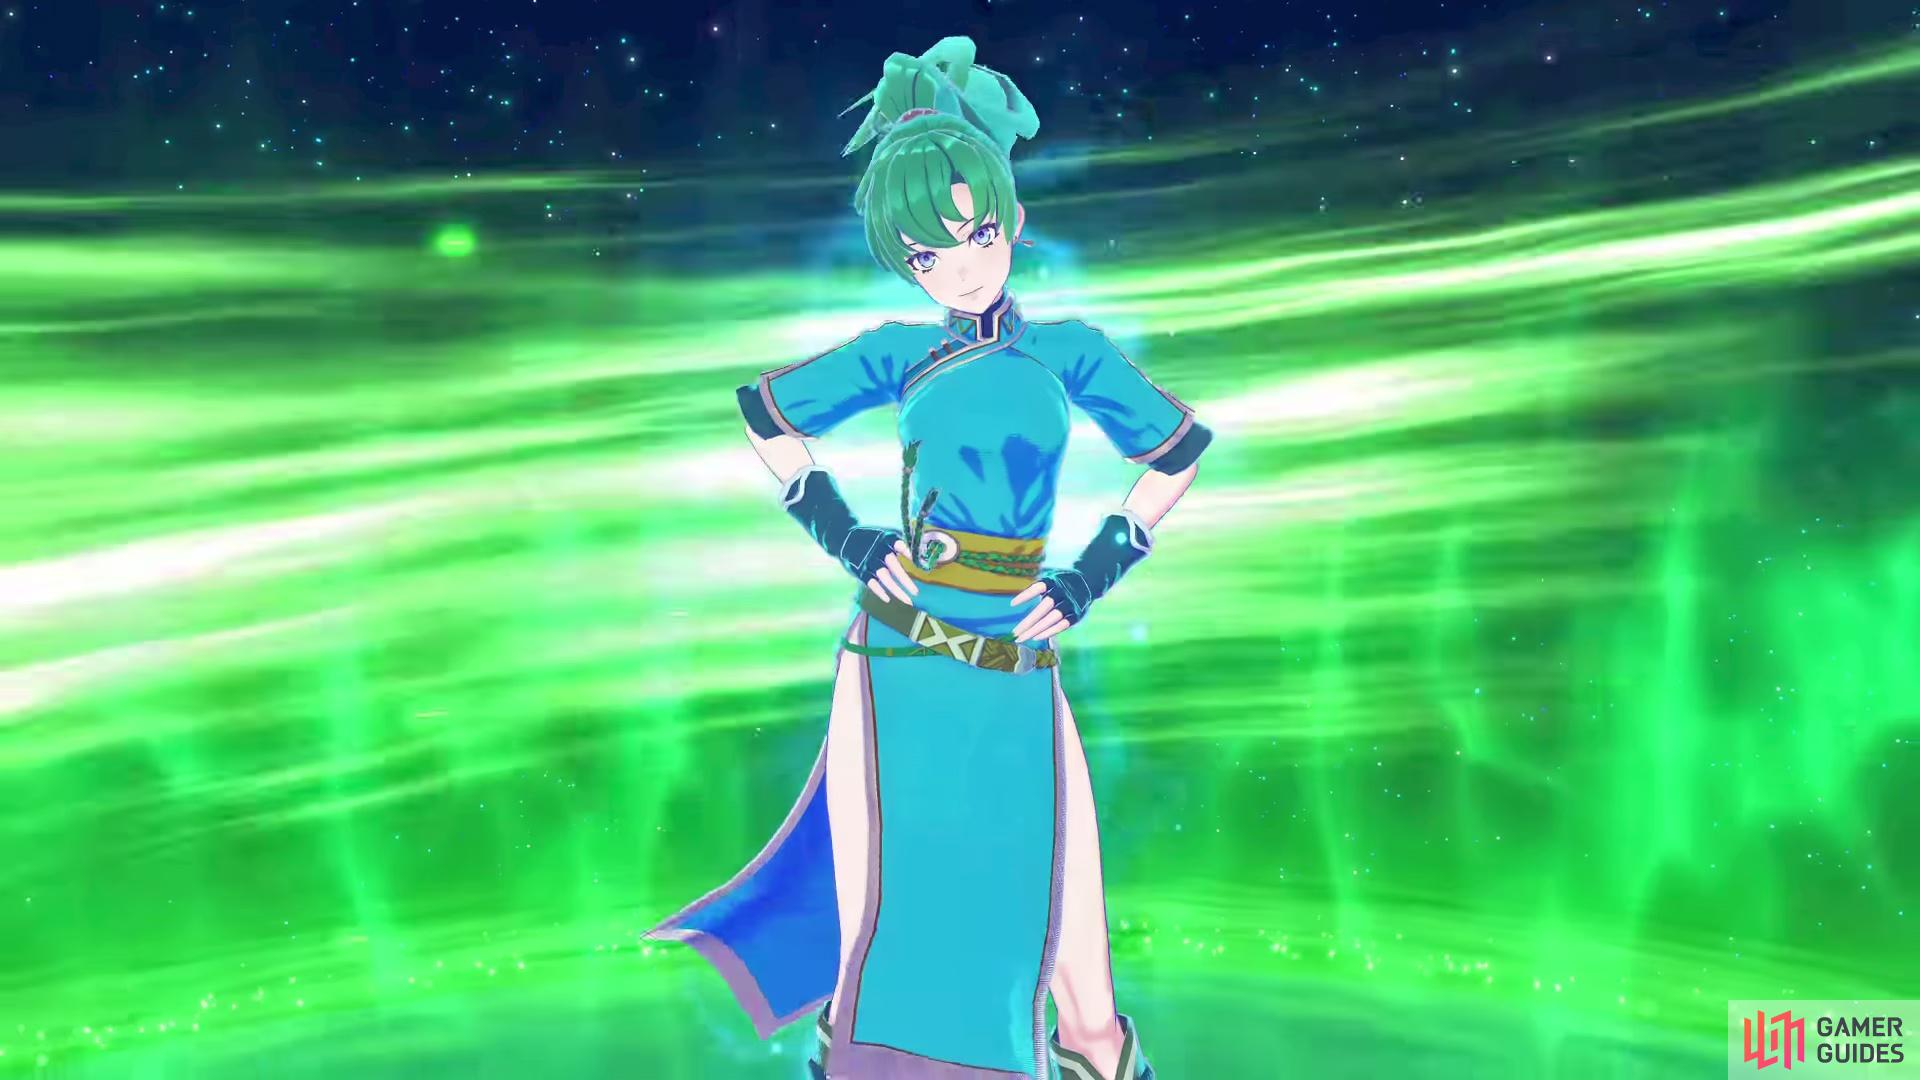 You will get Lyn’s Emblem during the battle in Chapter 11.